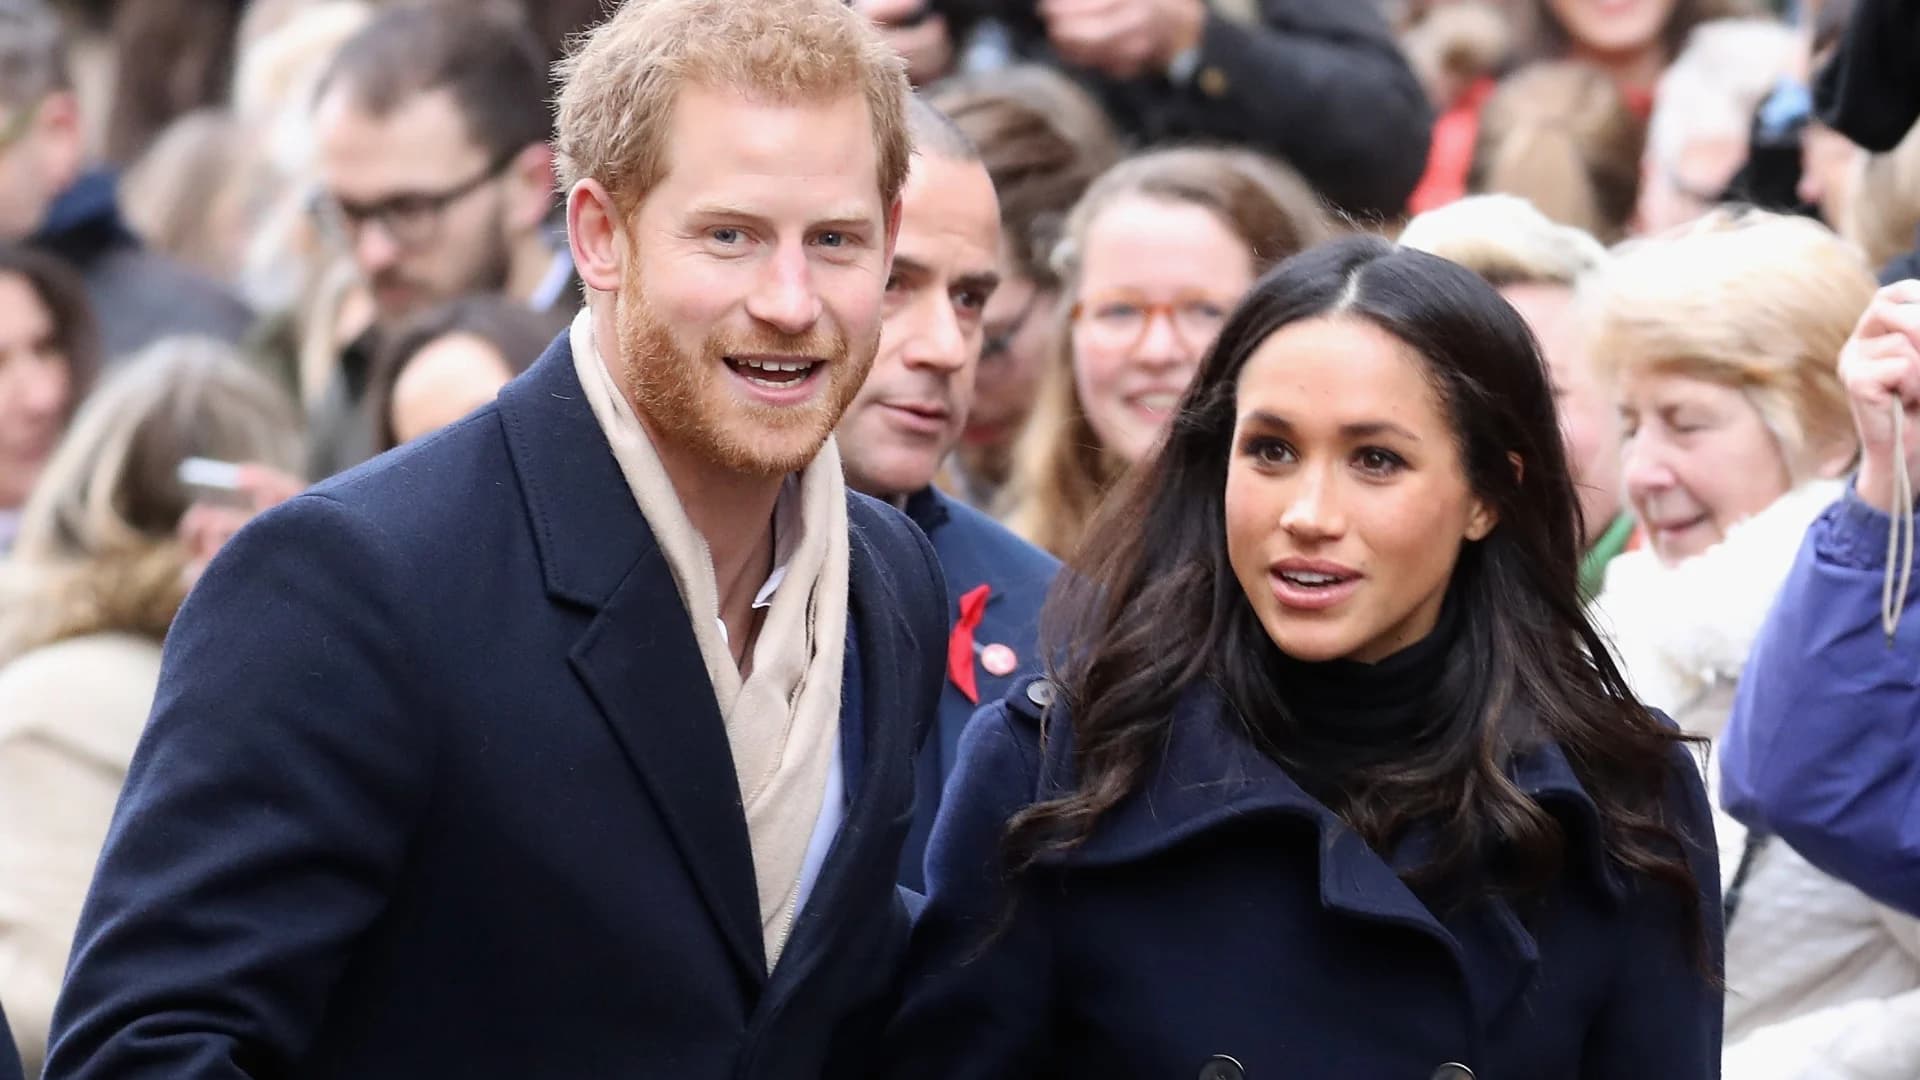 Royal Engagement: Prince Harry and fiancee Meghan Markle